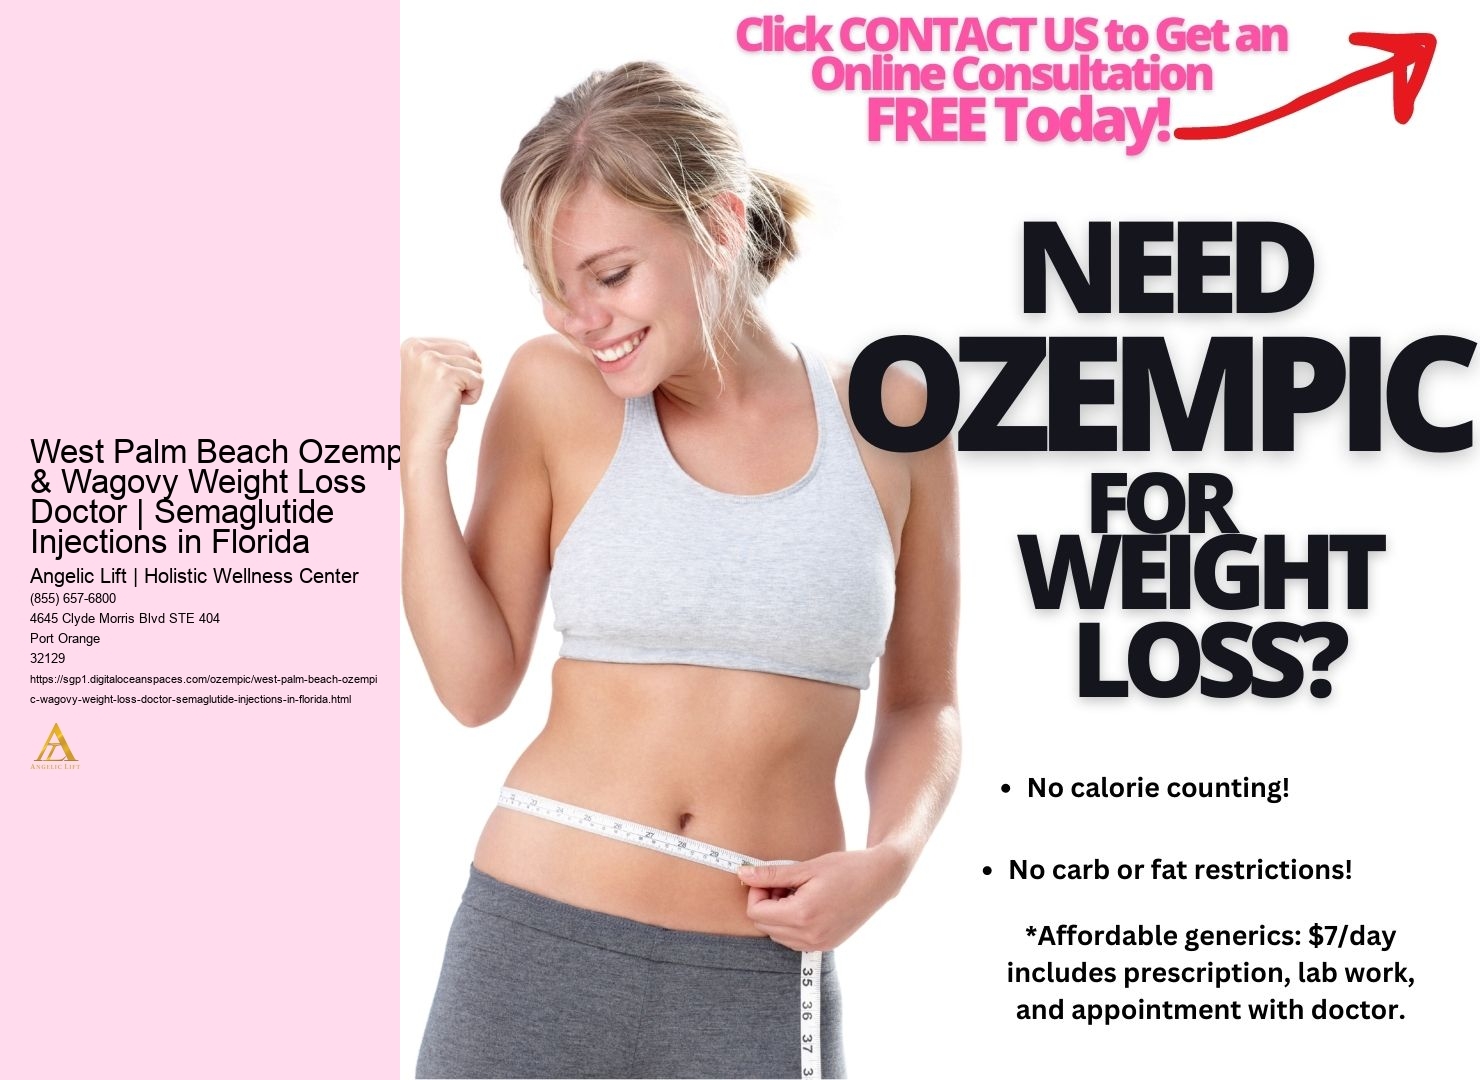 West Palm Beach Ozempic & Wagovy Weight Loss Doctor | Semaglutide Injections in Florida